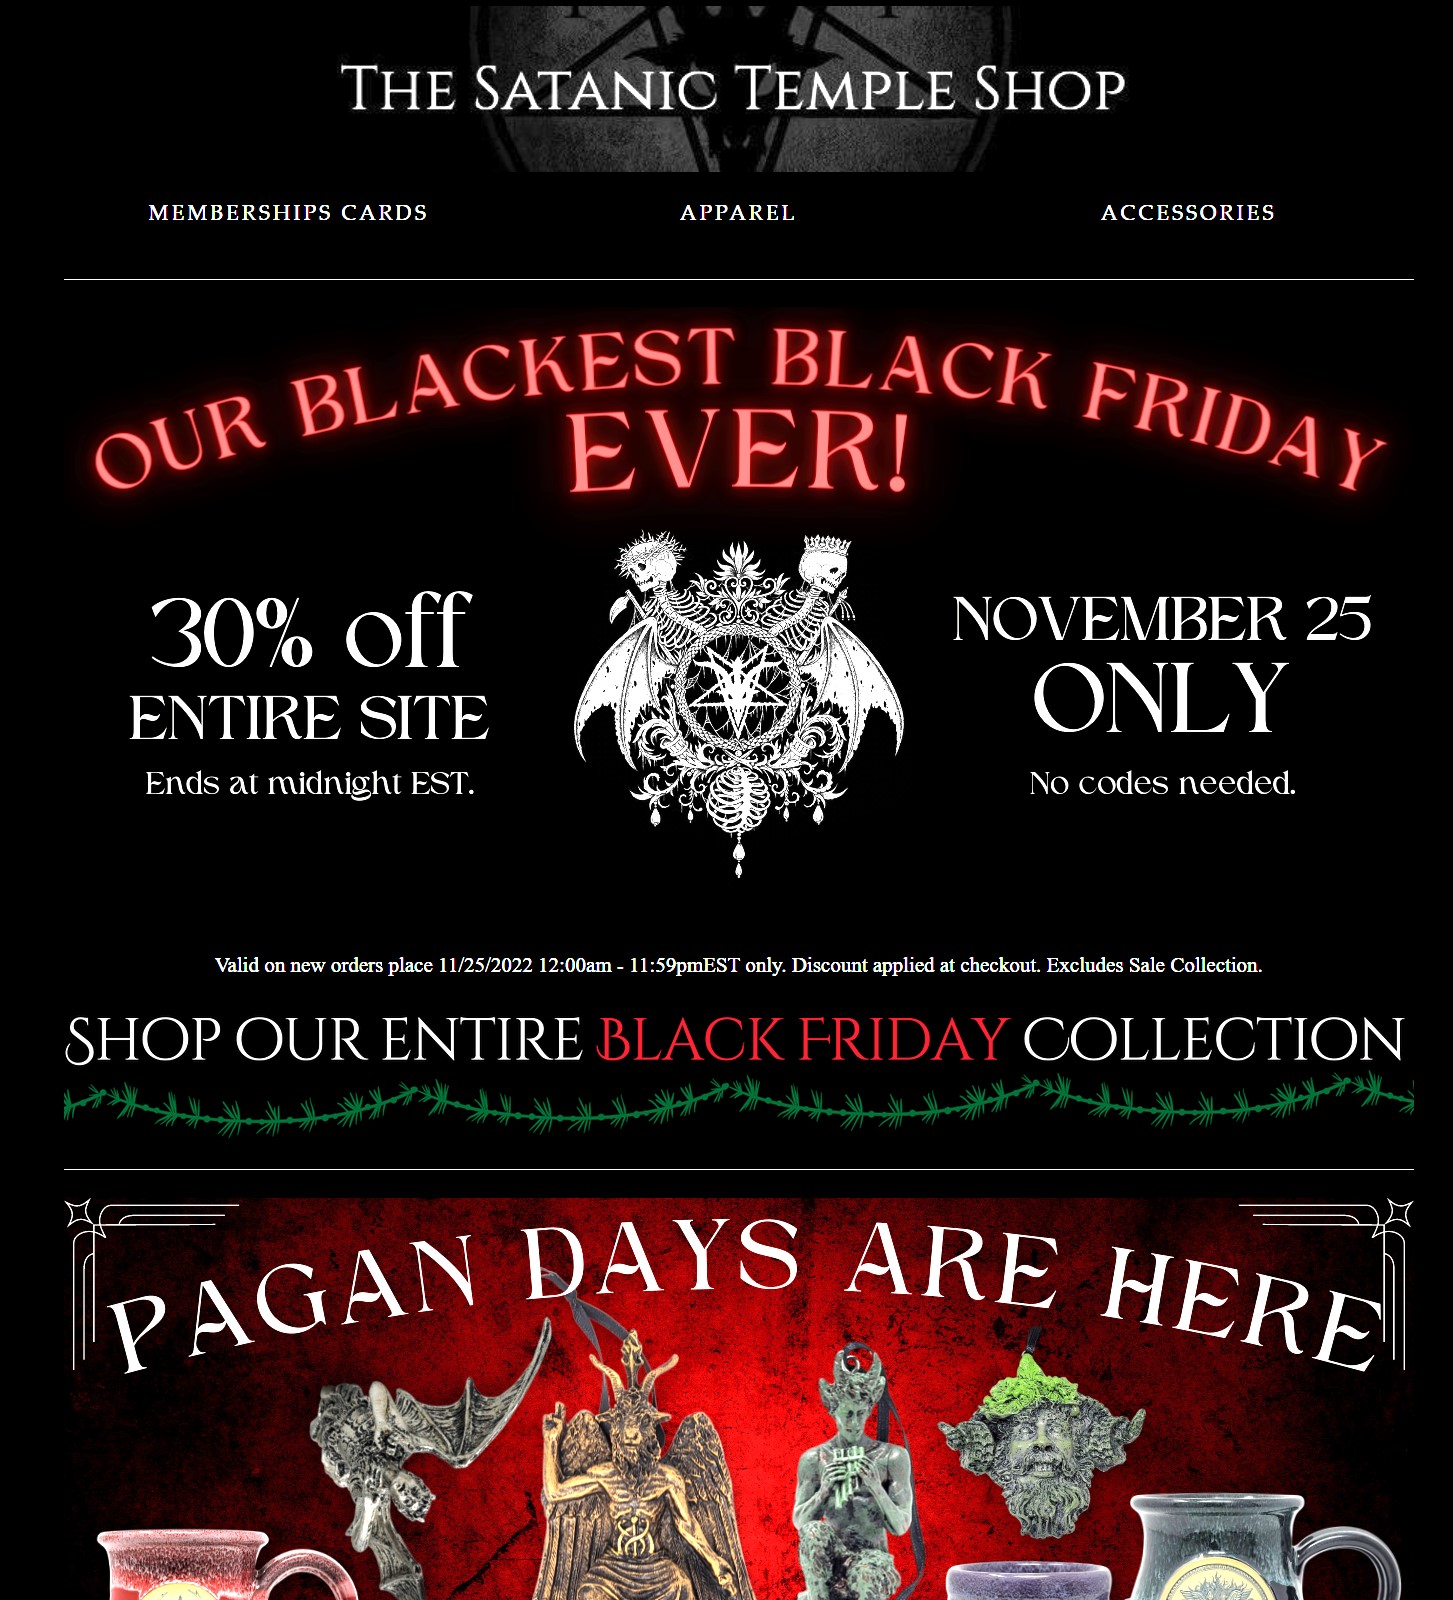 The Satanic Temple - 30% off entire site - Nov 25th only $30